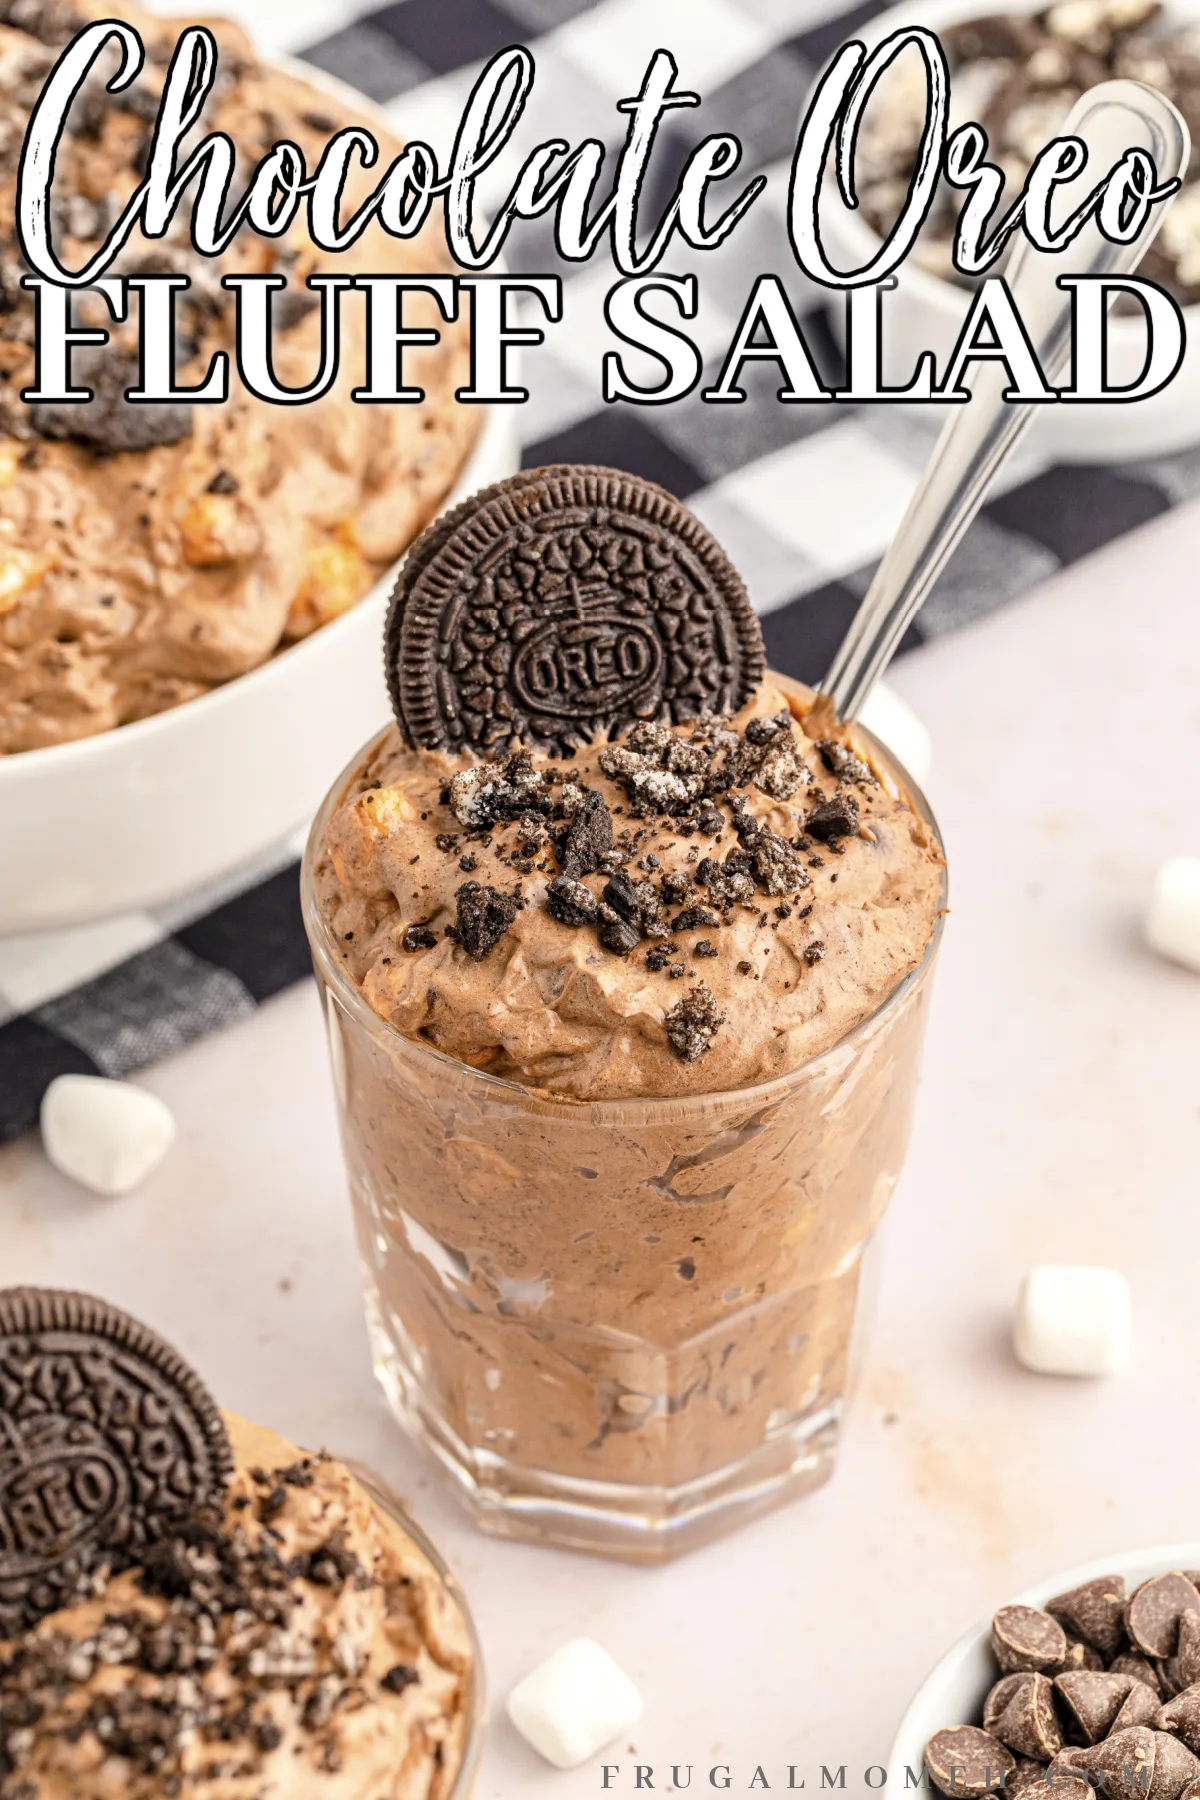 With just 6 simple ingredients you can make this creamy, fluffy, and tasty Oreo Fluff Salad recipe. Perfect for parties or special occasions!